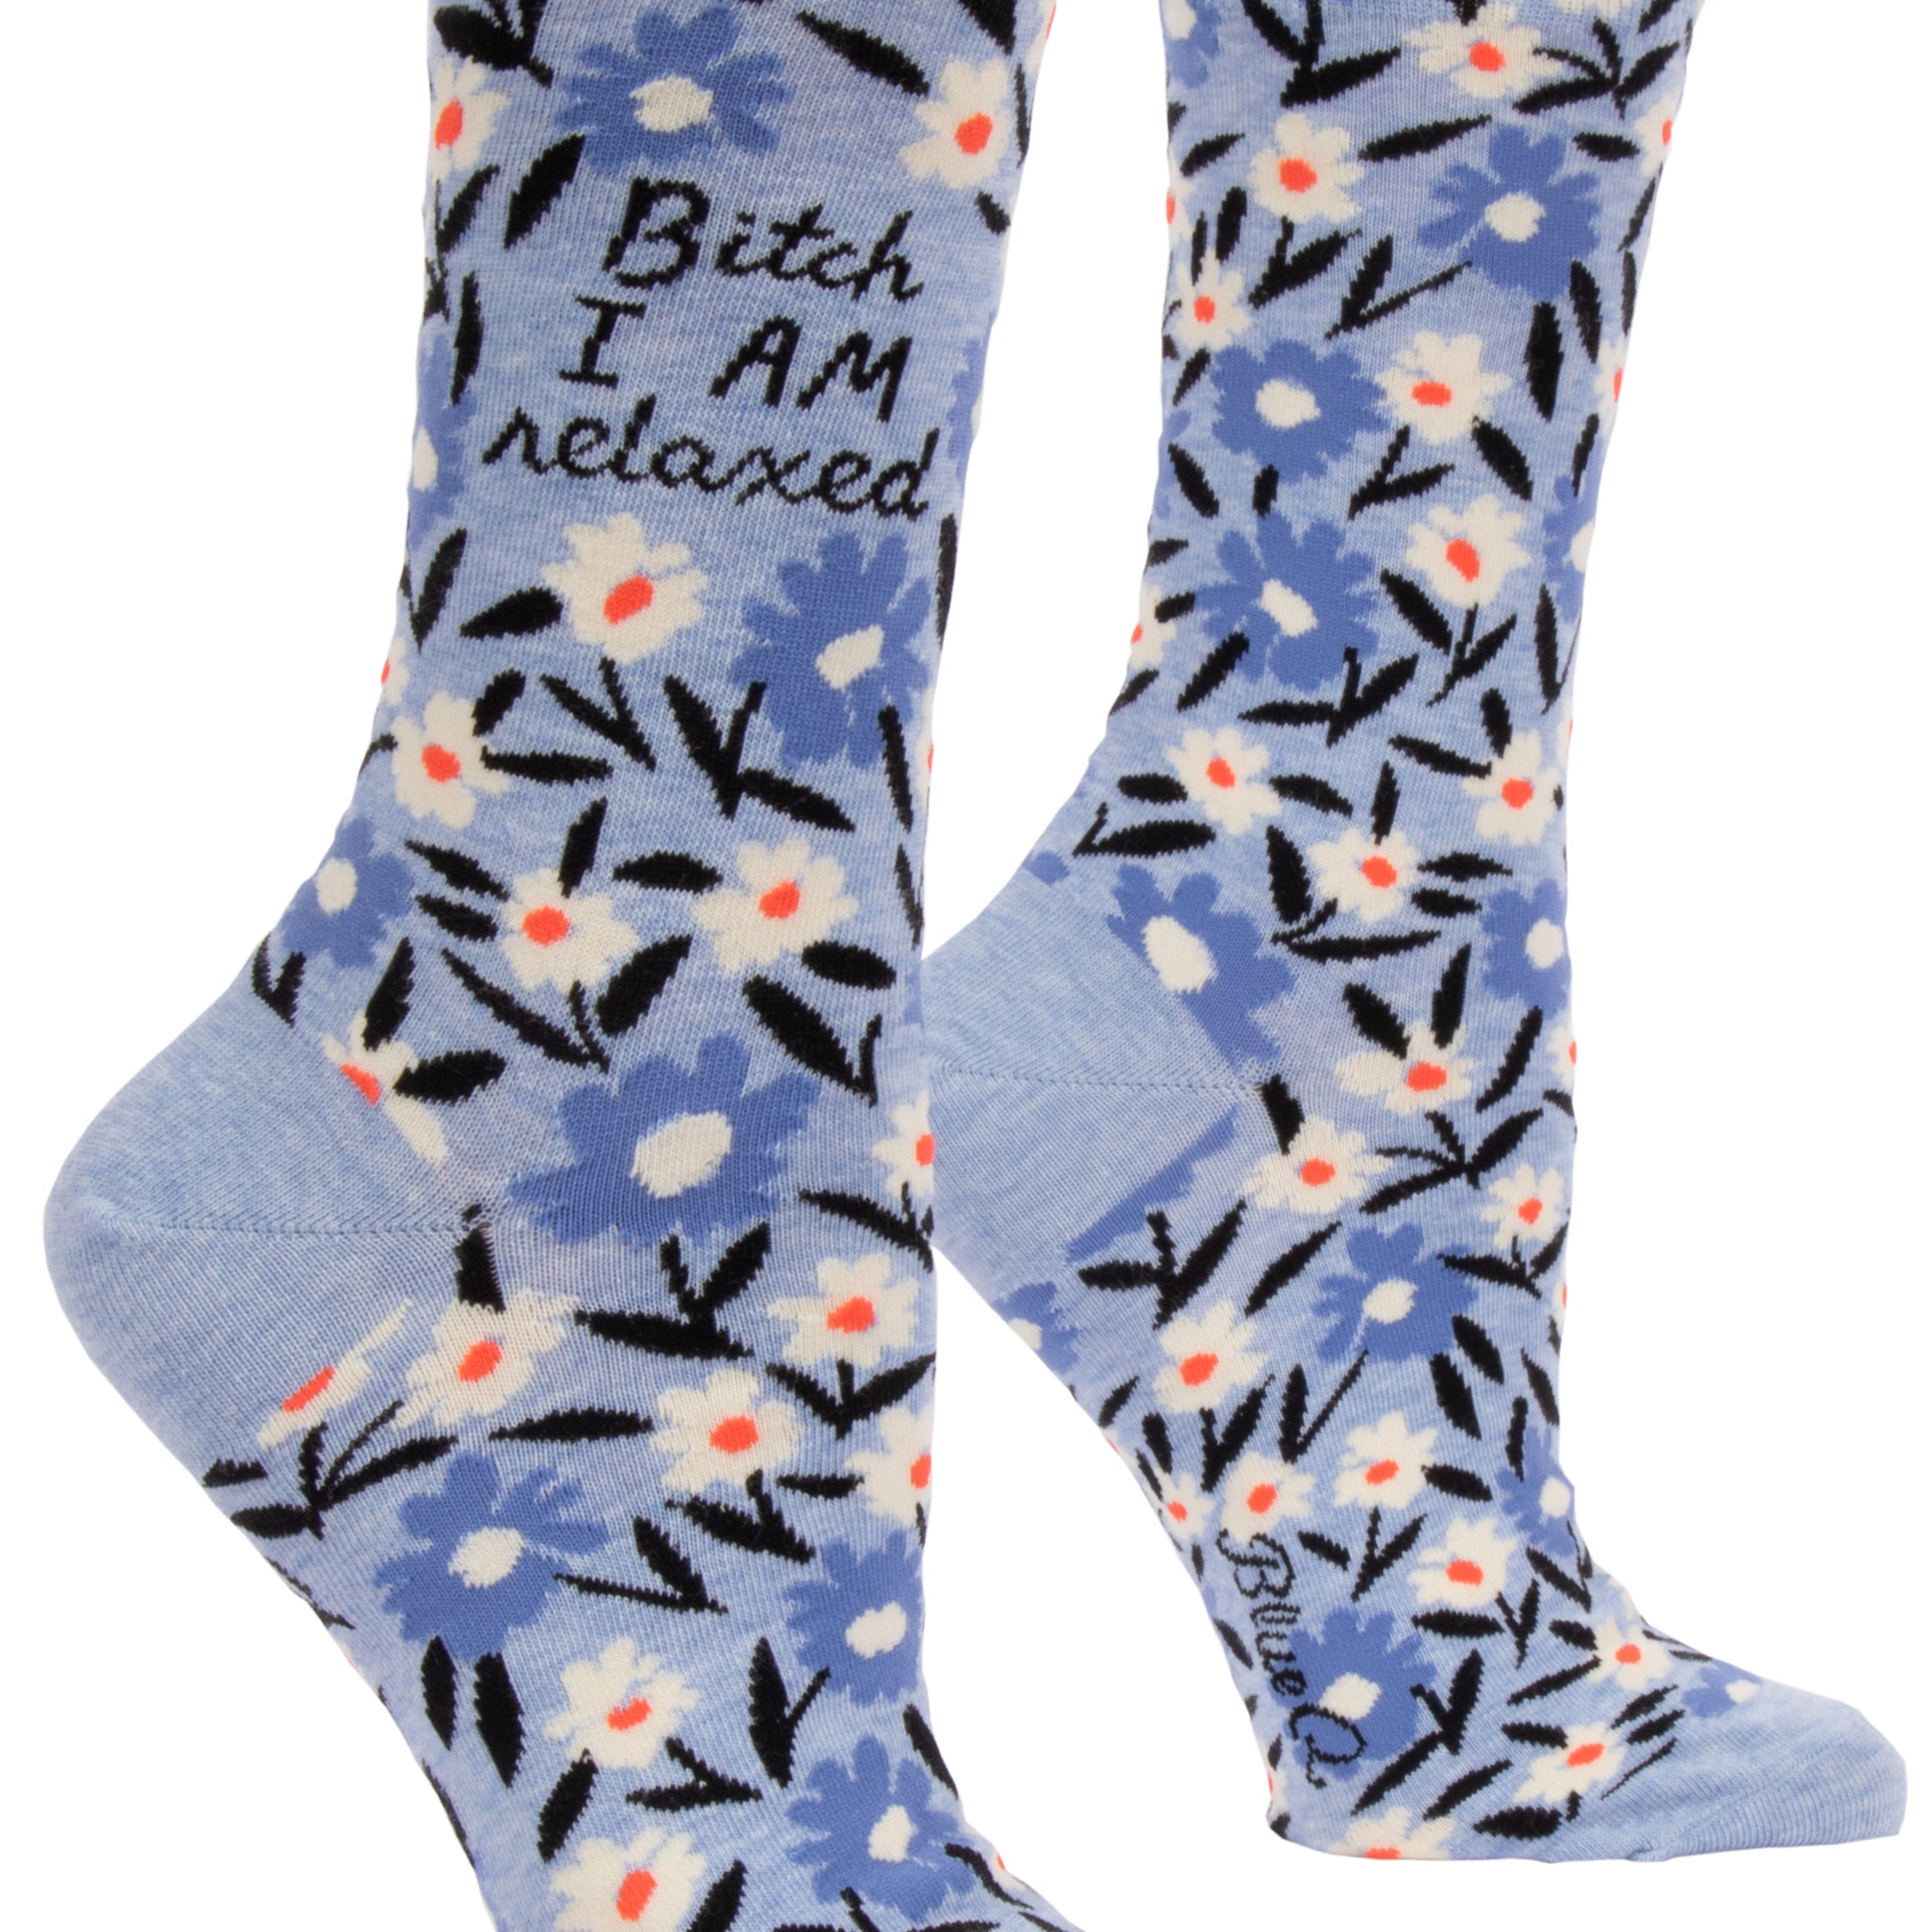 light blue socks with white and darker blue flowers and on ankle they say bitch i am relaxed